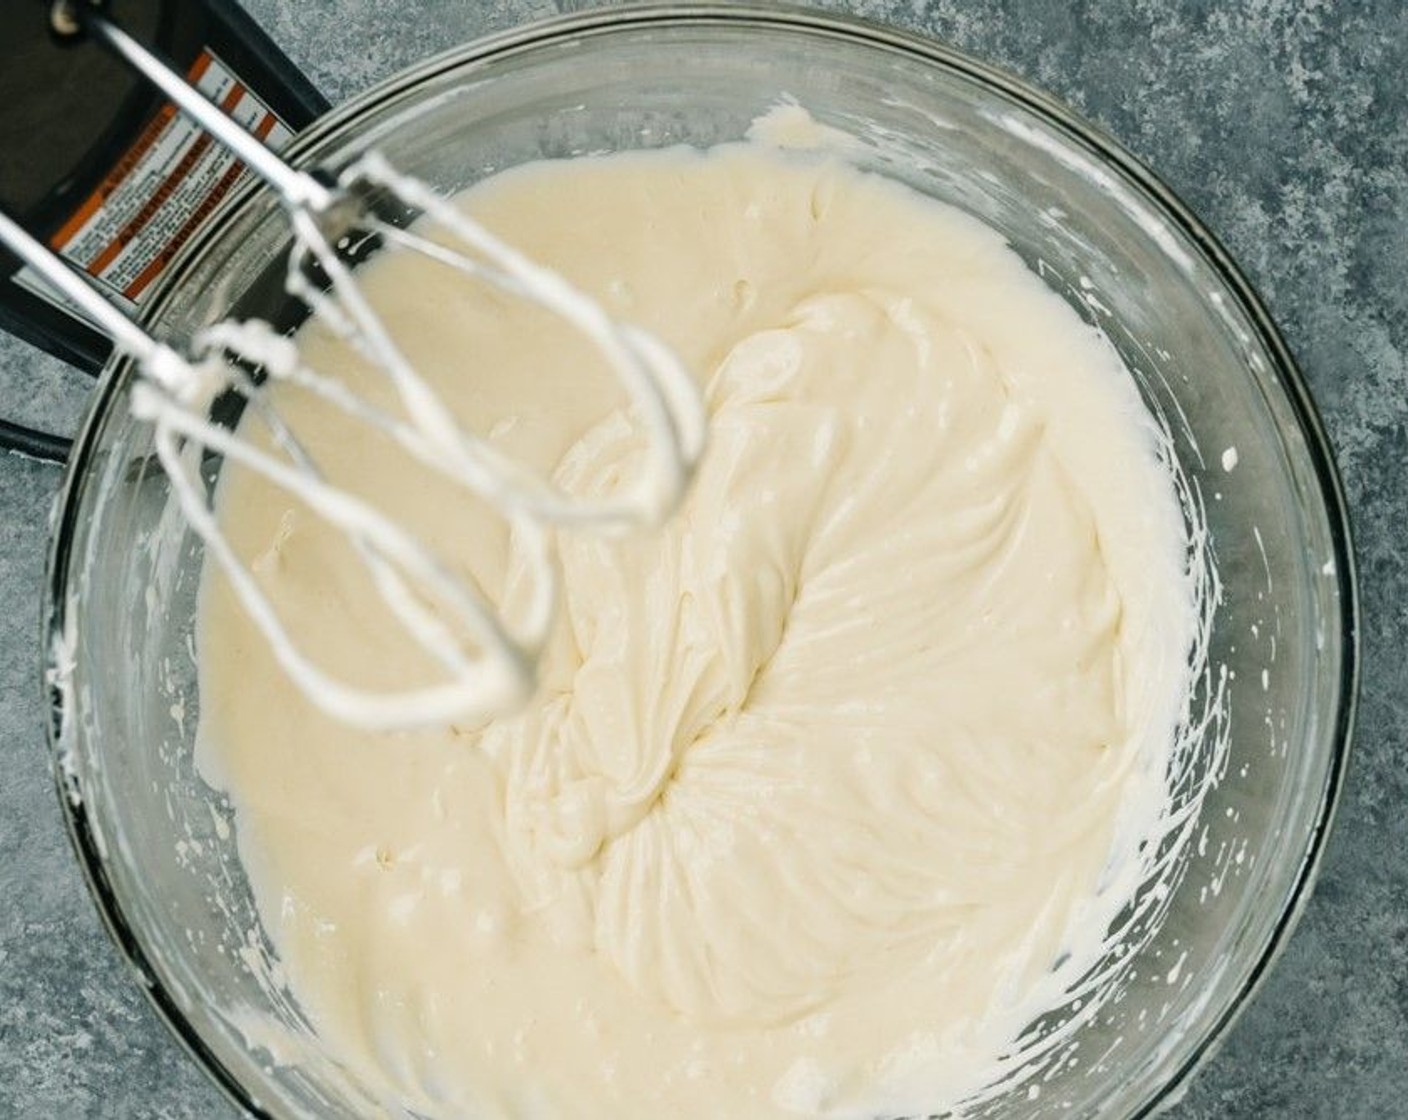 step 6 Add Cream Cheese (2 pckg), Granulated Sugar (3/4 cup), Vanilla Extract (1 tsp), and juice from Lemon (1) to a large mixing bowl and use an electric mixer to beat the cream cheese and sugar together until smooth. Scrapes the sides of the bowl as needed.